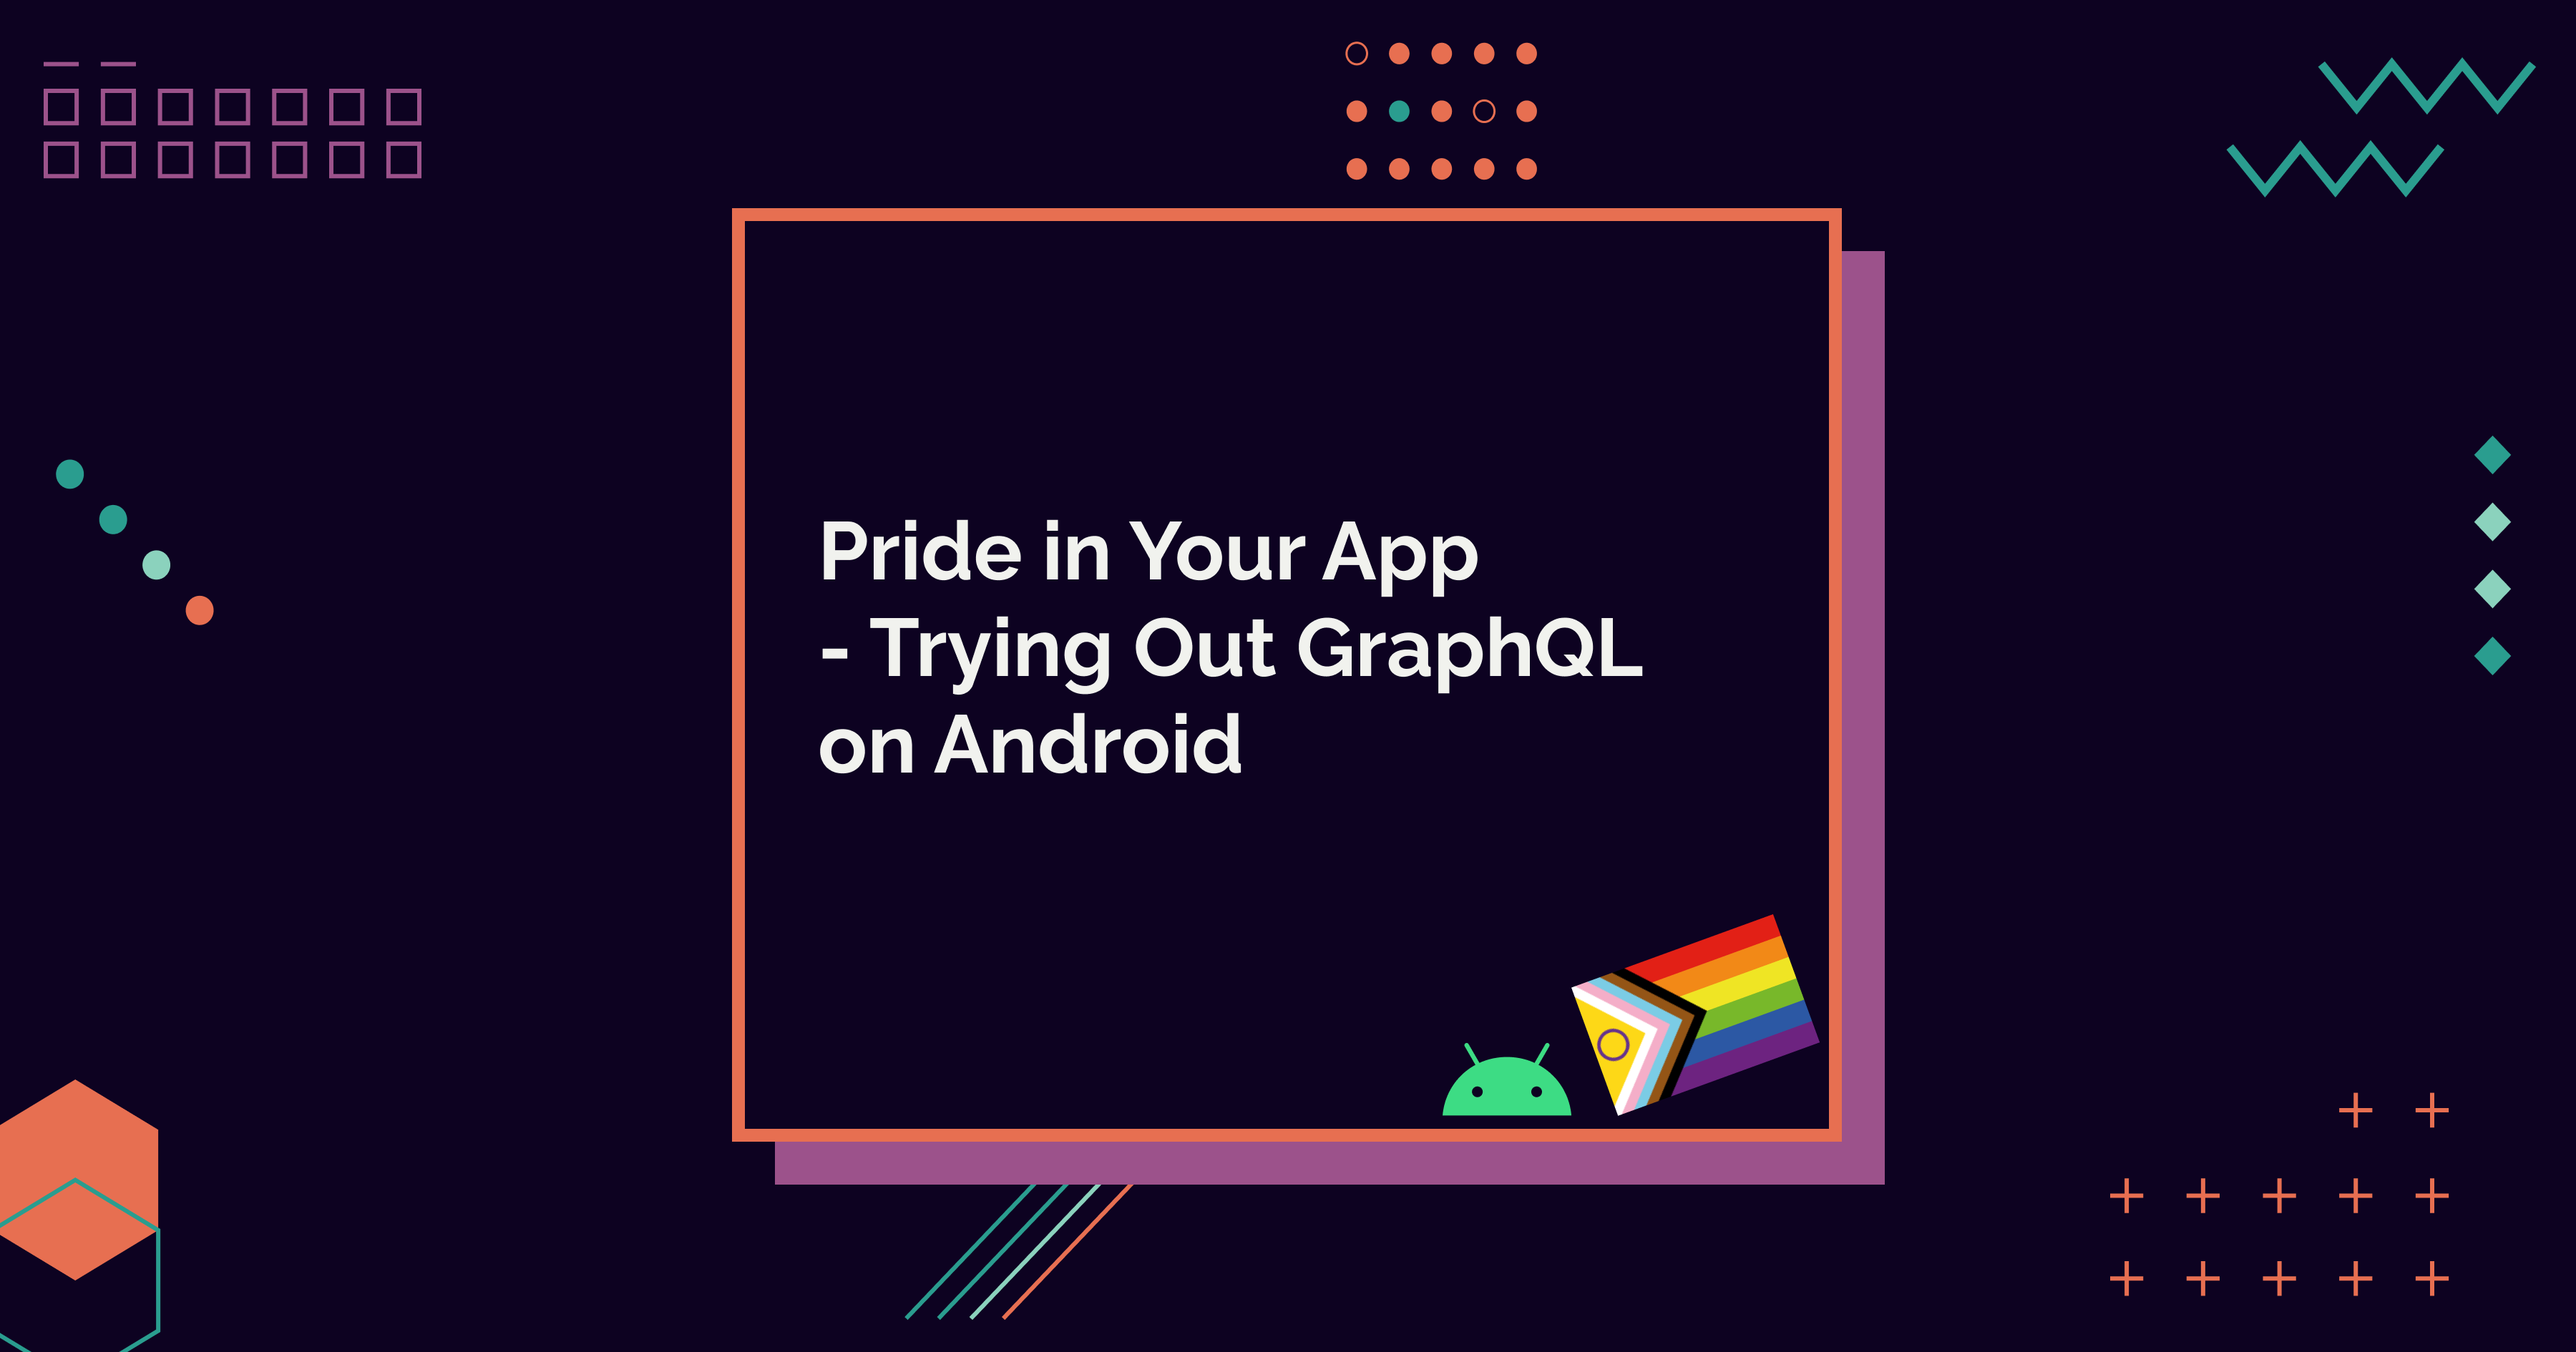 Pride in Your App - Trying Out GraphQL on Android